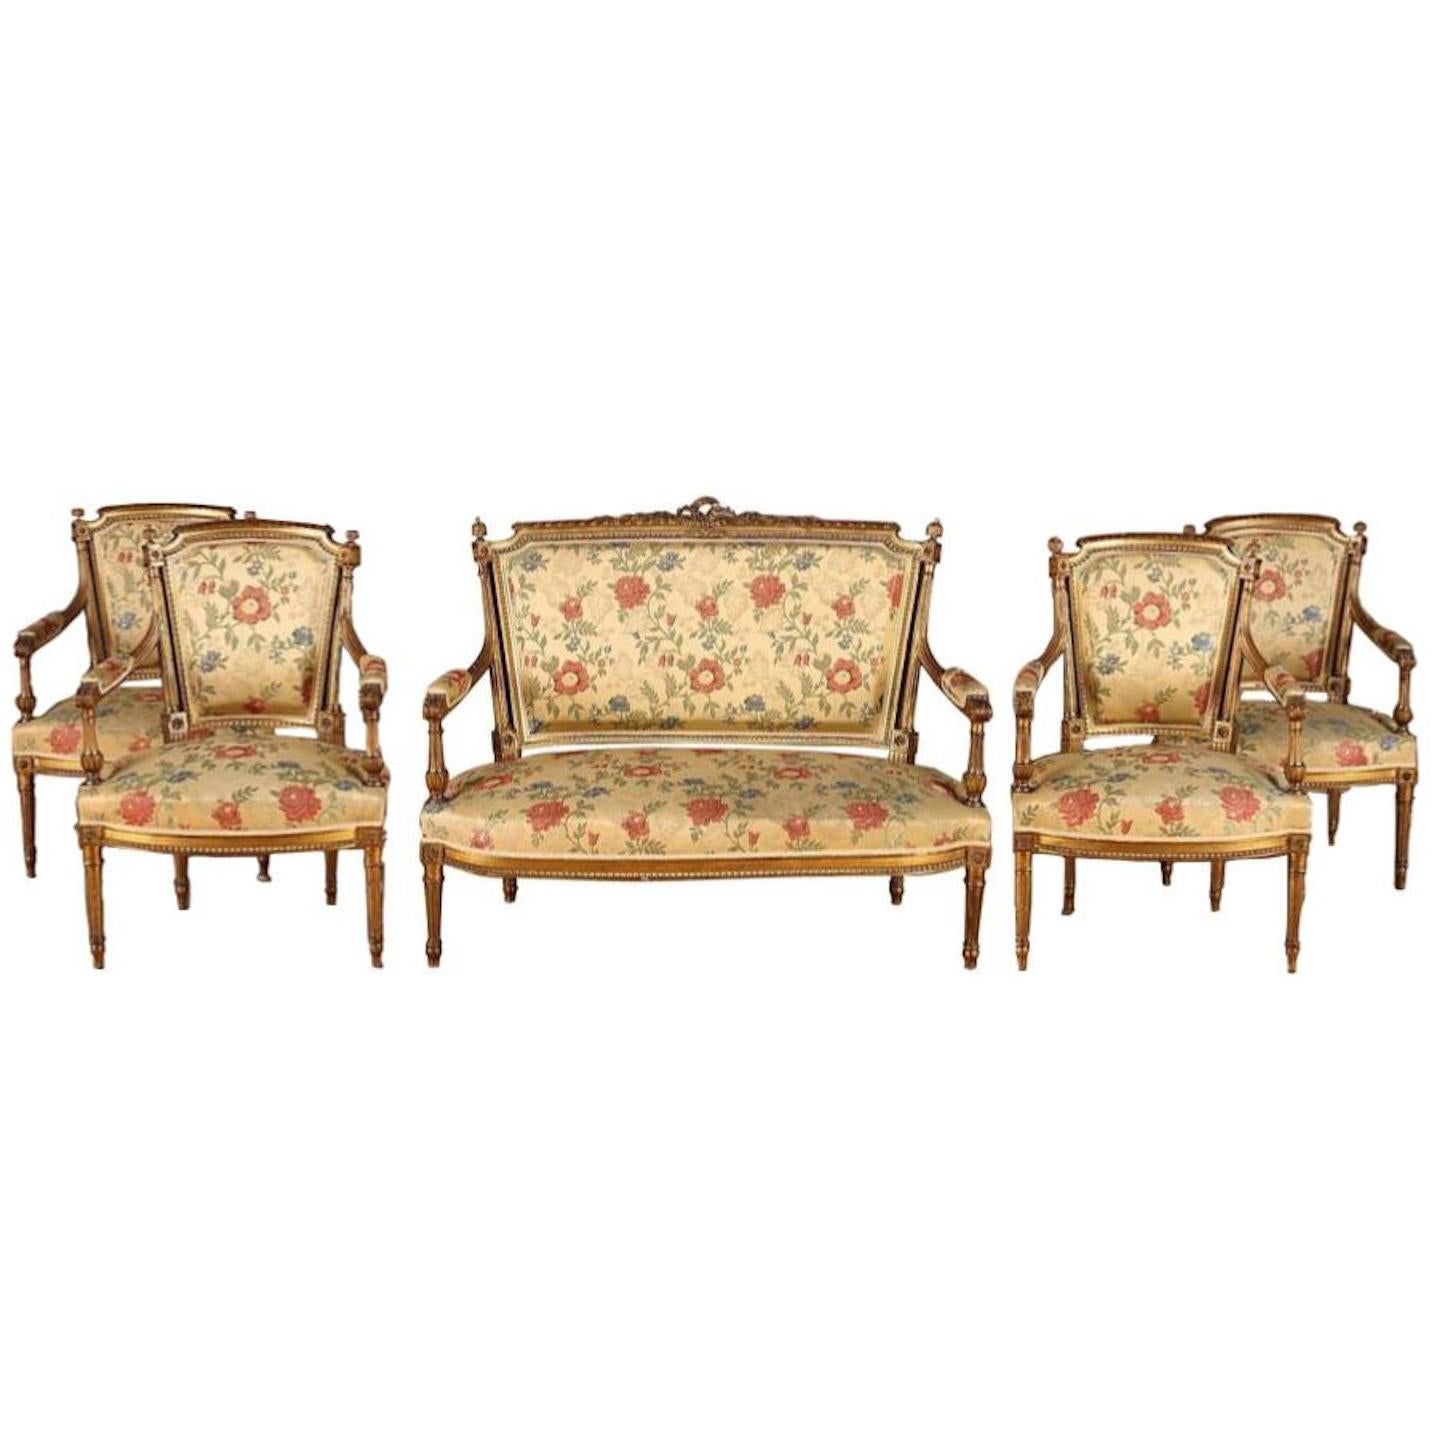 Set of 5, French Giltwood Louis XVI Style Settee and 4 Armchairs